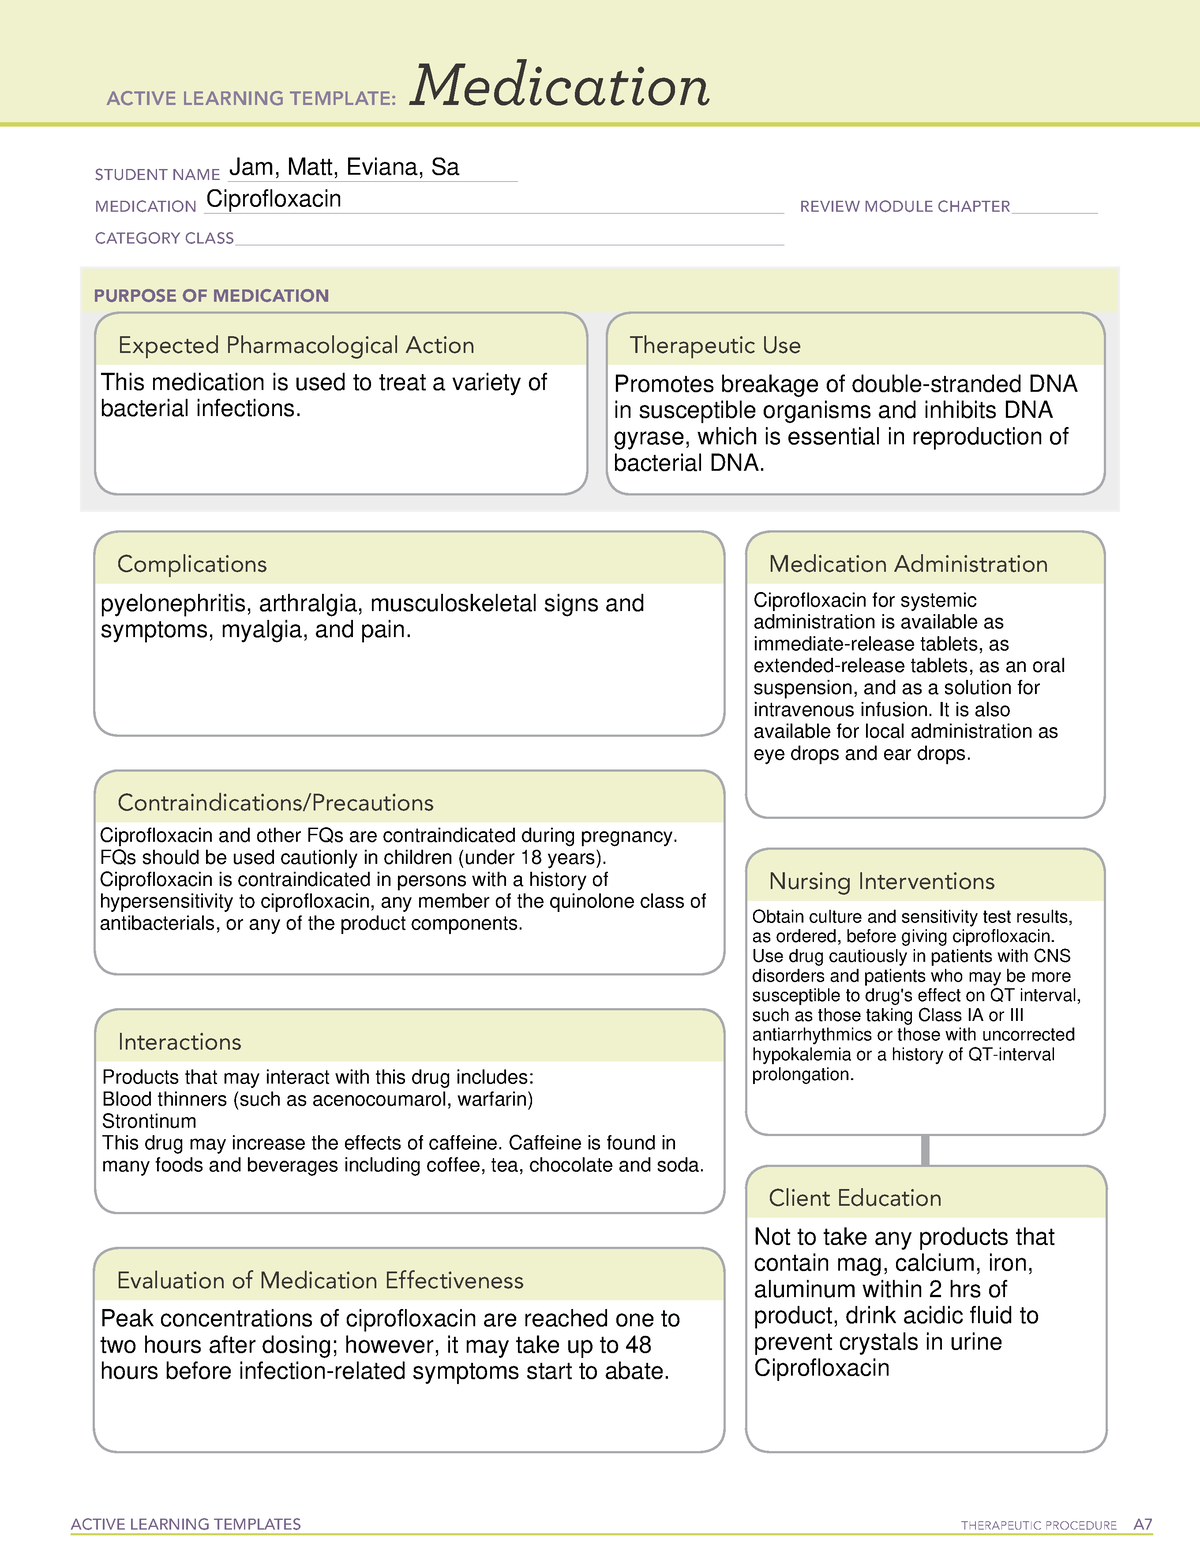 ciprofloxacin-active-learning-template-medication-active-learning